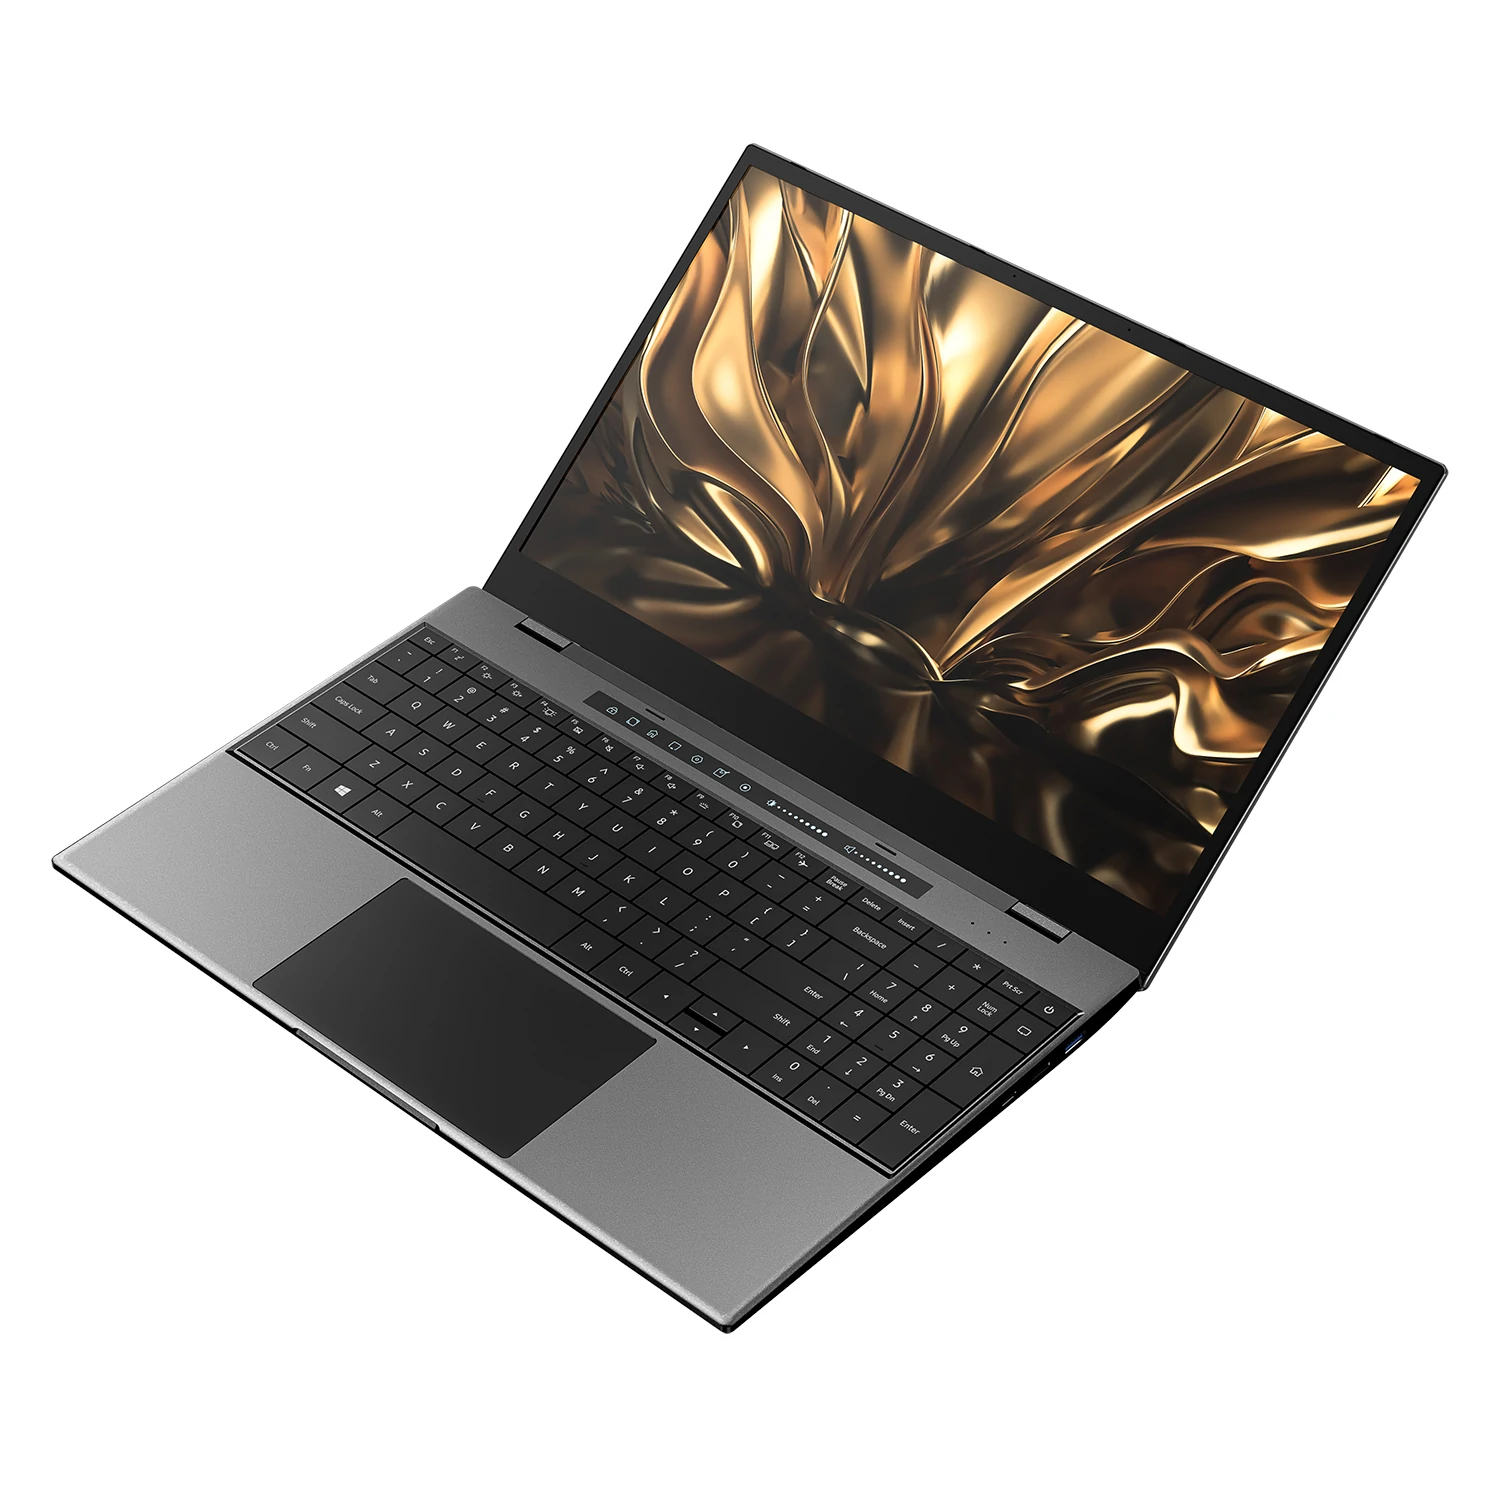 Find DERE TBOOK T11 Laptop 15 6 Inch Intel i7 1165G7 IntelÂ IrisÂ Xe Graphics 16GB RAM 512GB SSD 1080P Screen Backlit Keyboard 45 6Wh Battery Win10 PRO Notebook for Sale on Gipsybee.com